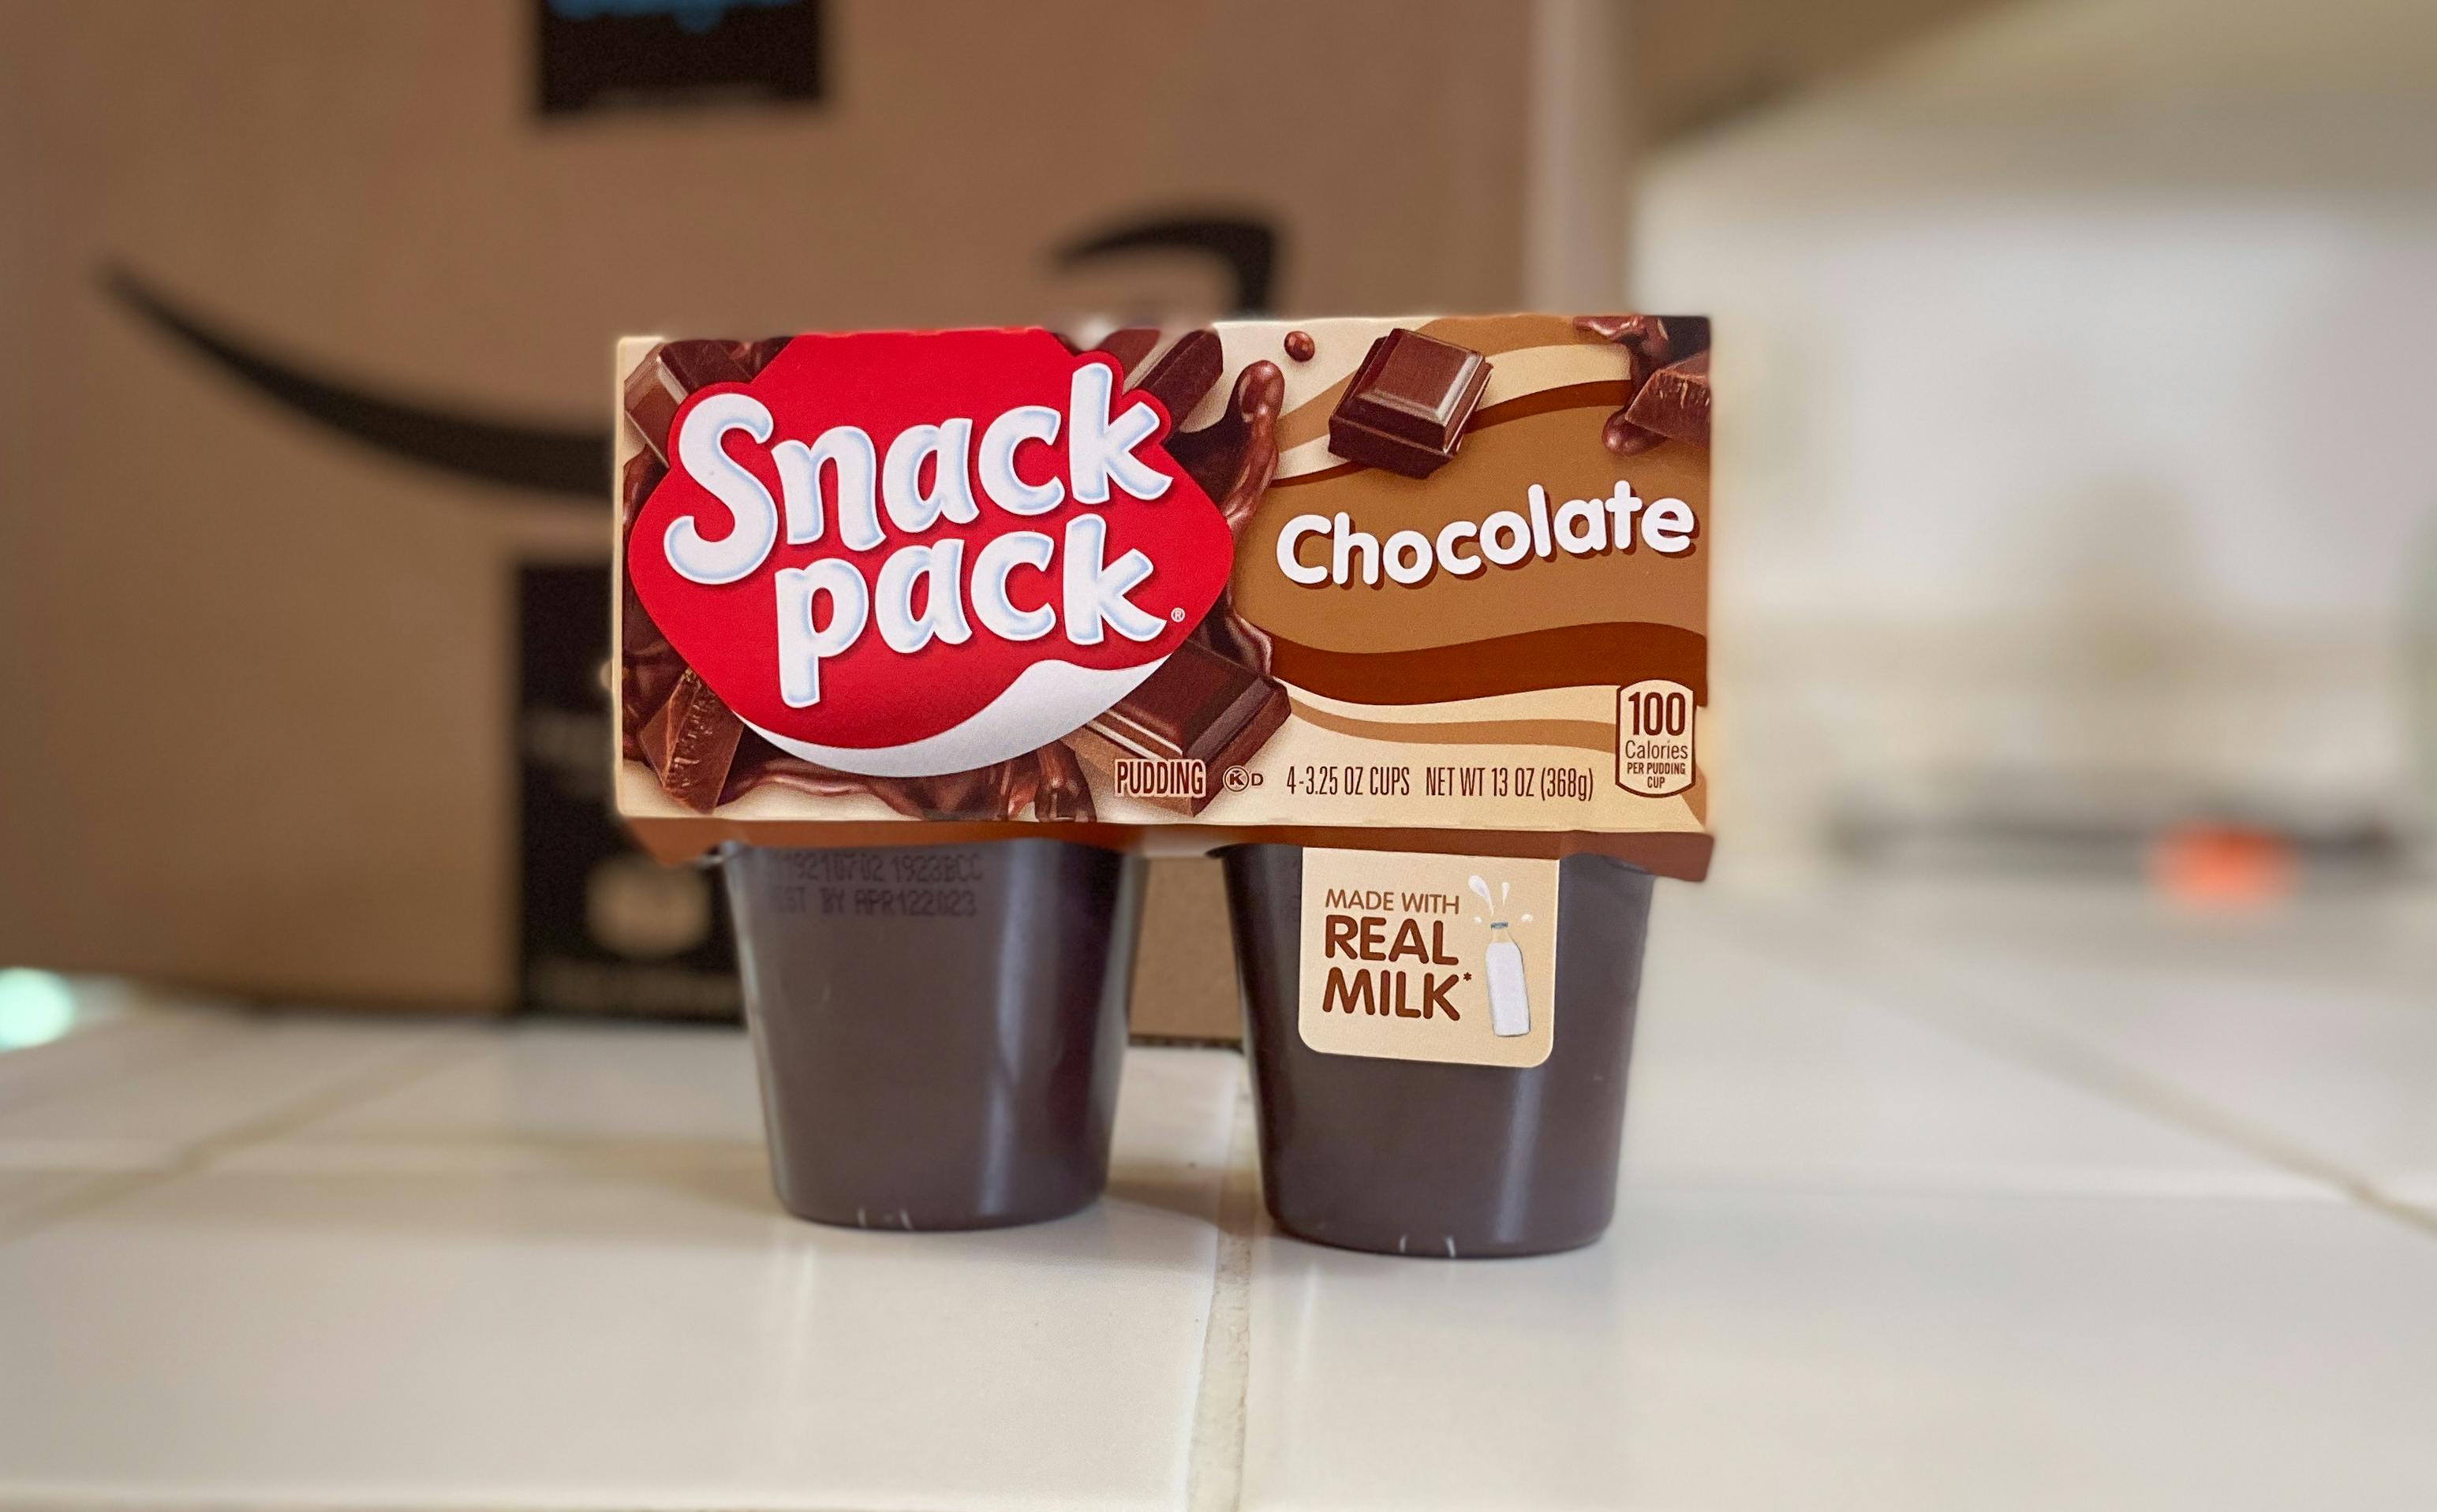 chocolate snack pack pudding on a counter in front of an amazon box